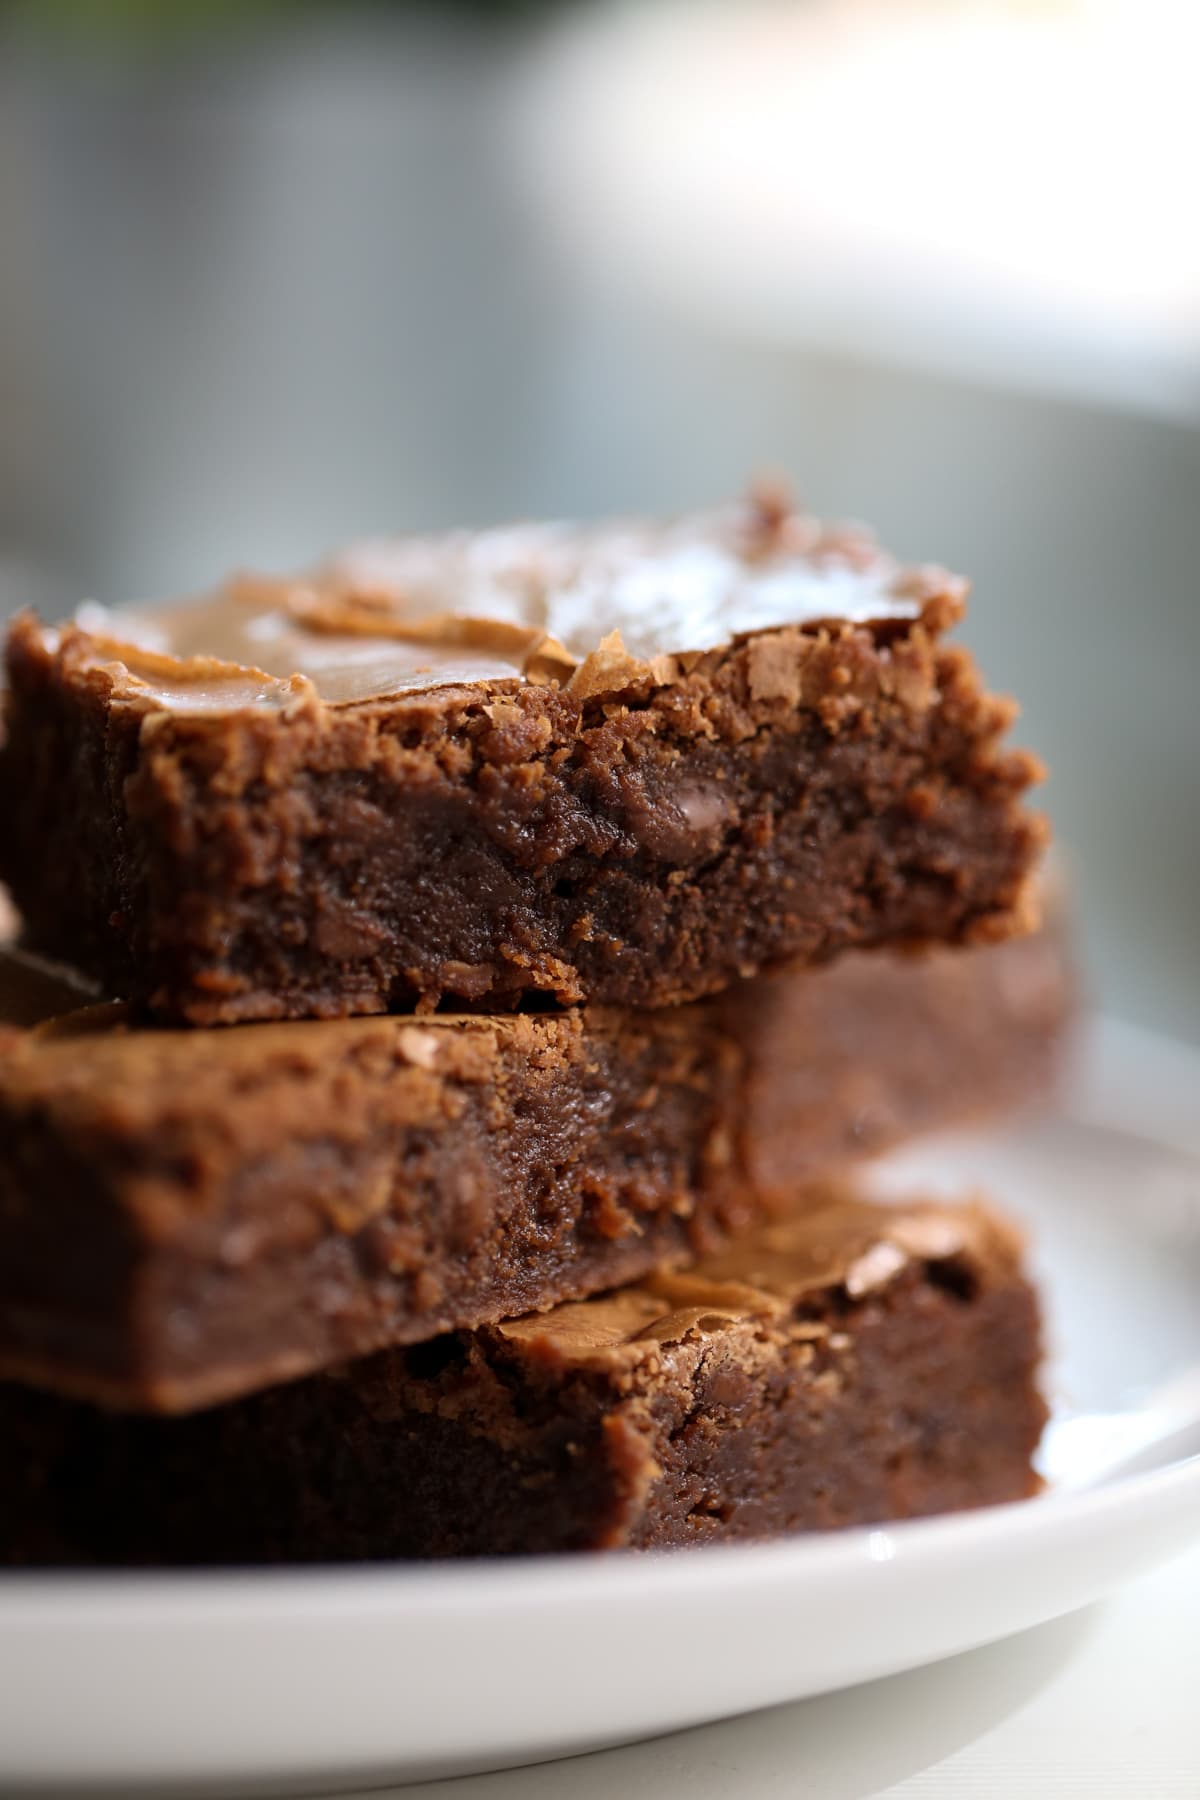 Fudge Brownies couldn't have tasted any better using Nutrasumma's chocolate pea protein powder